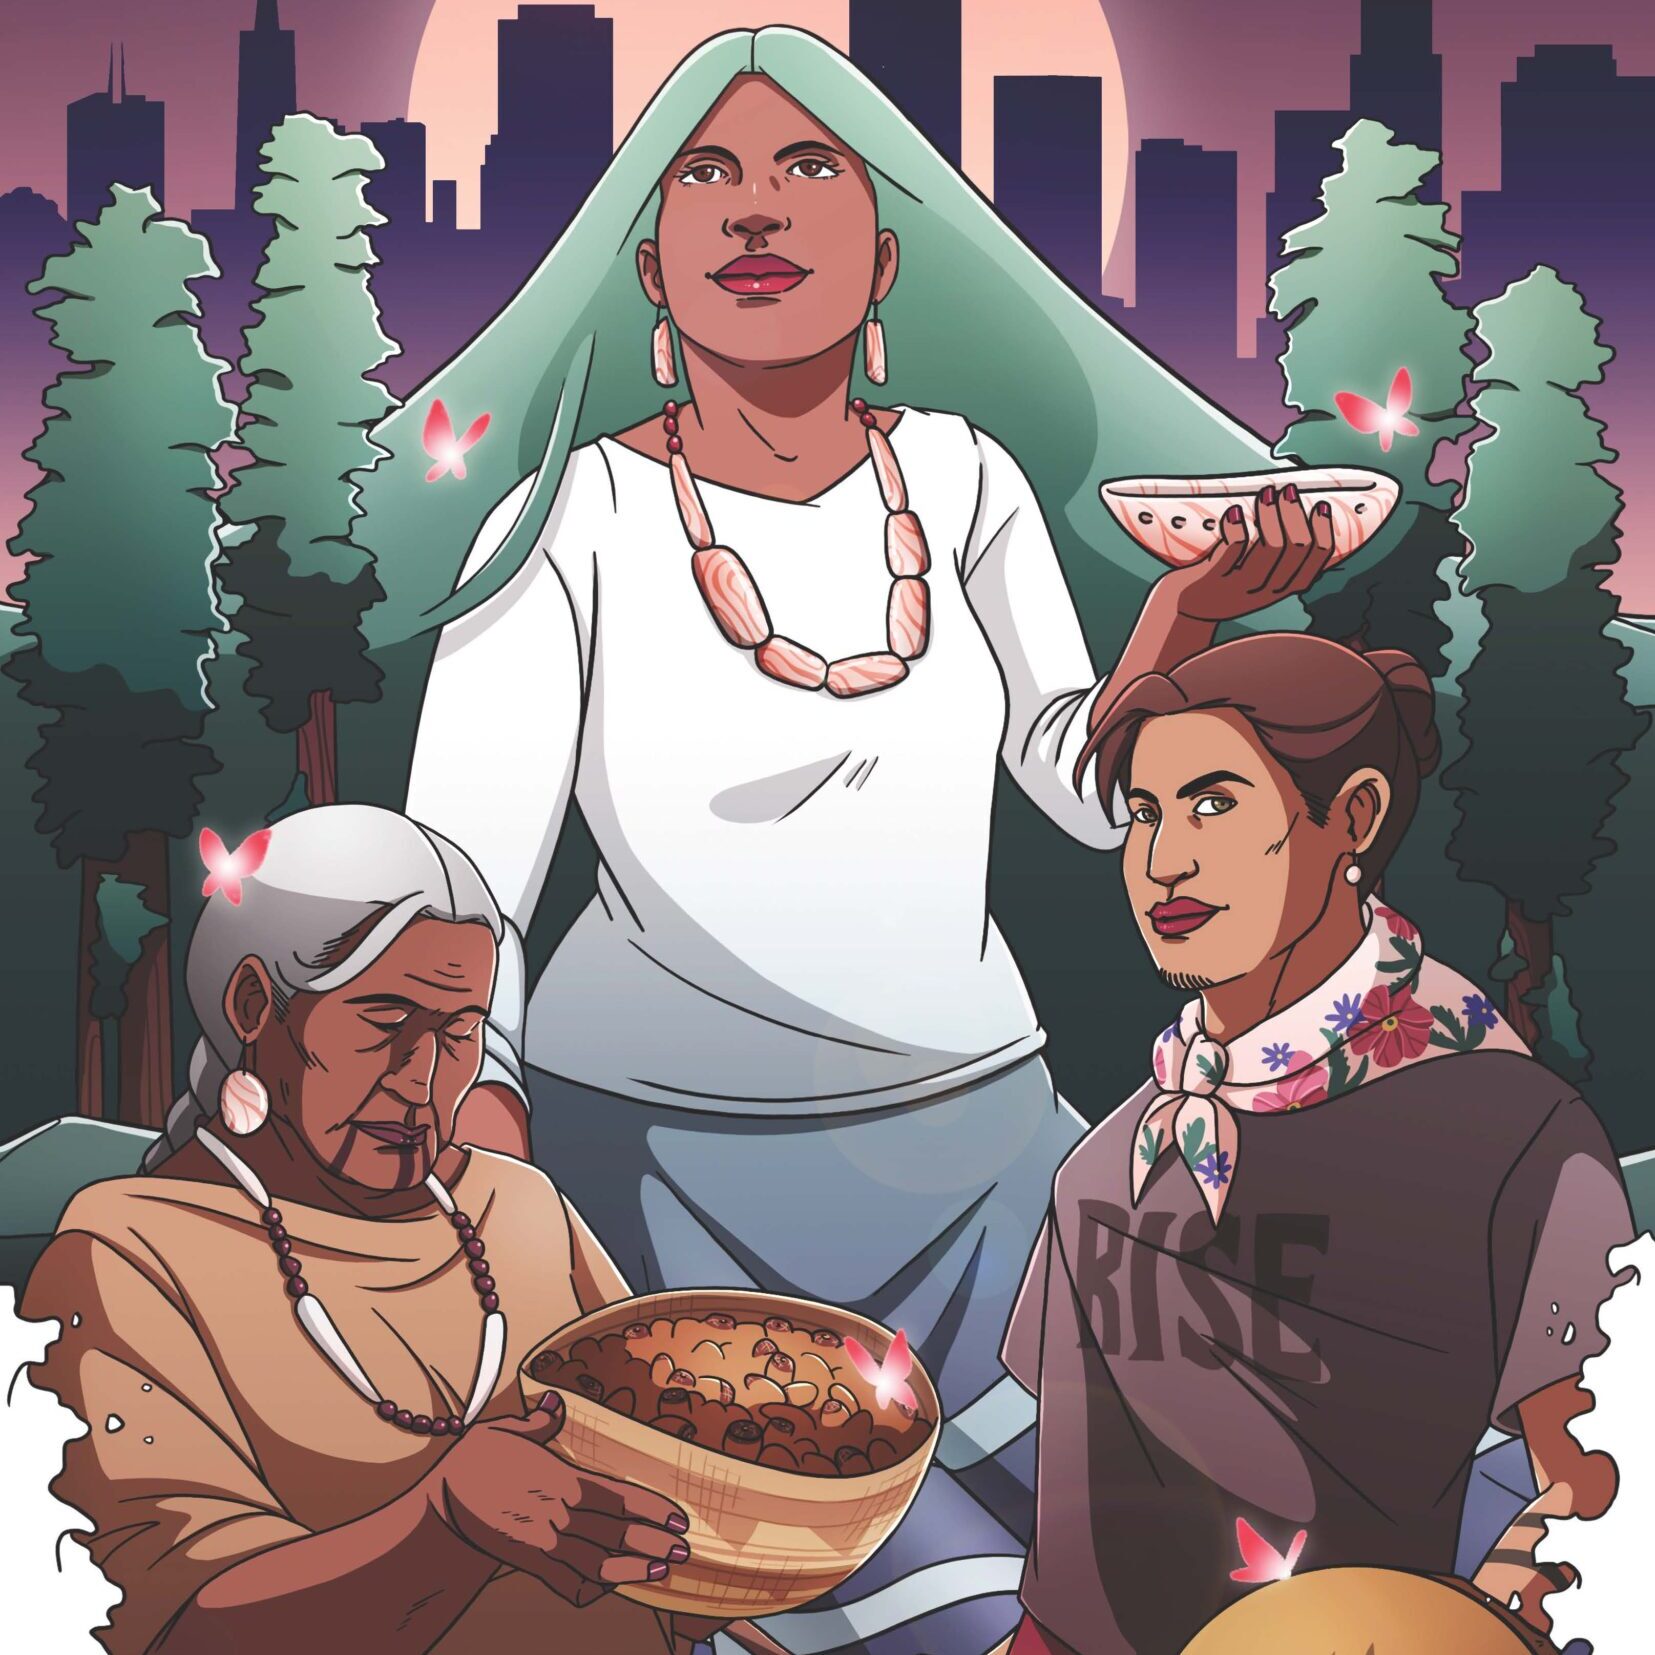 Artist: Jackie Fawn. This illustration is of a woman standing strong with the medicines our ancestors prayed with, a Two Spirit youth holding the drum and songs of our ancestors and wearing red for our MMIP (Murdered and Missing Indigenous Peoples), and of an elder, who has carried the knowledge of our ancestors for us to carry into future generations.